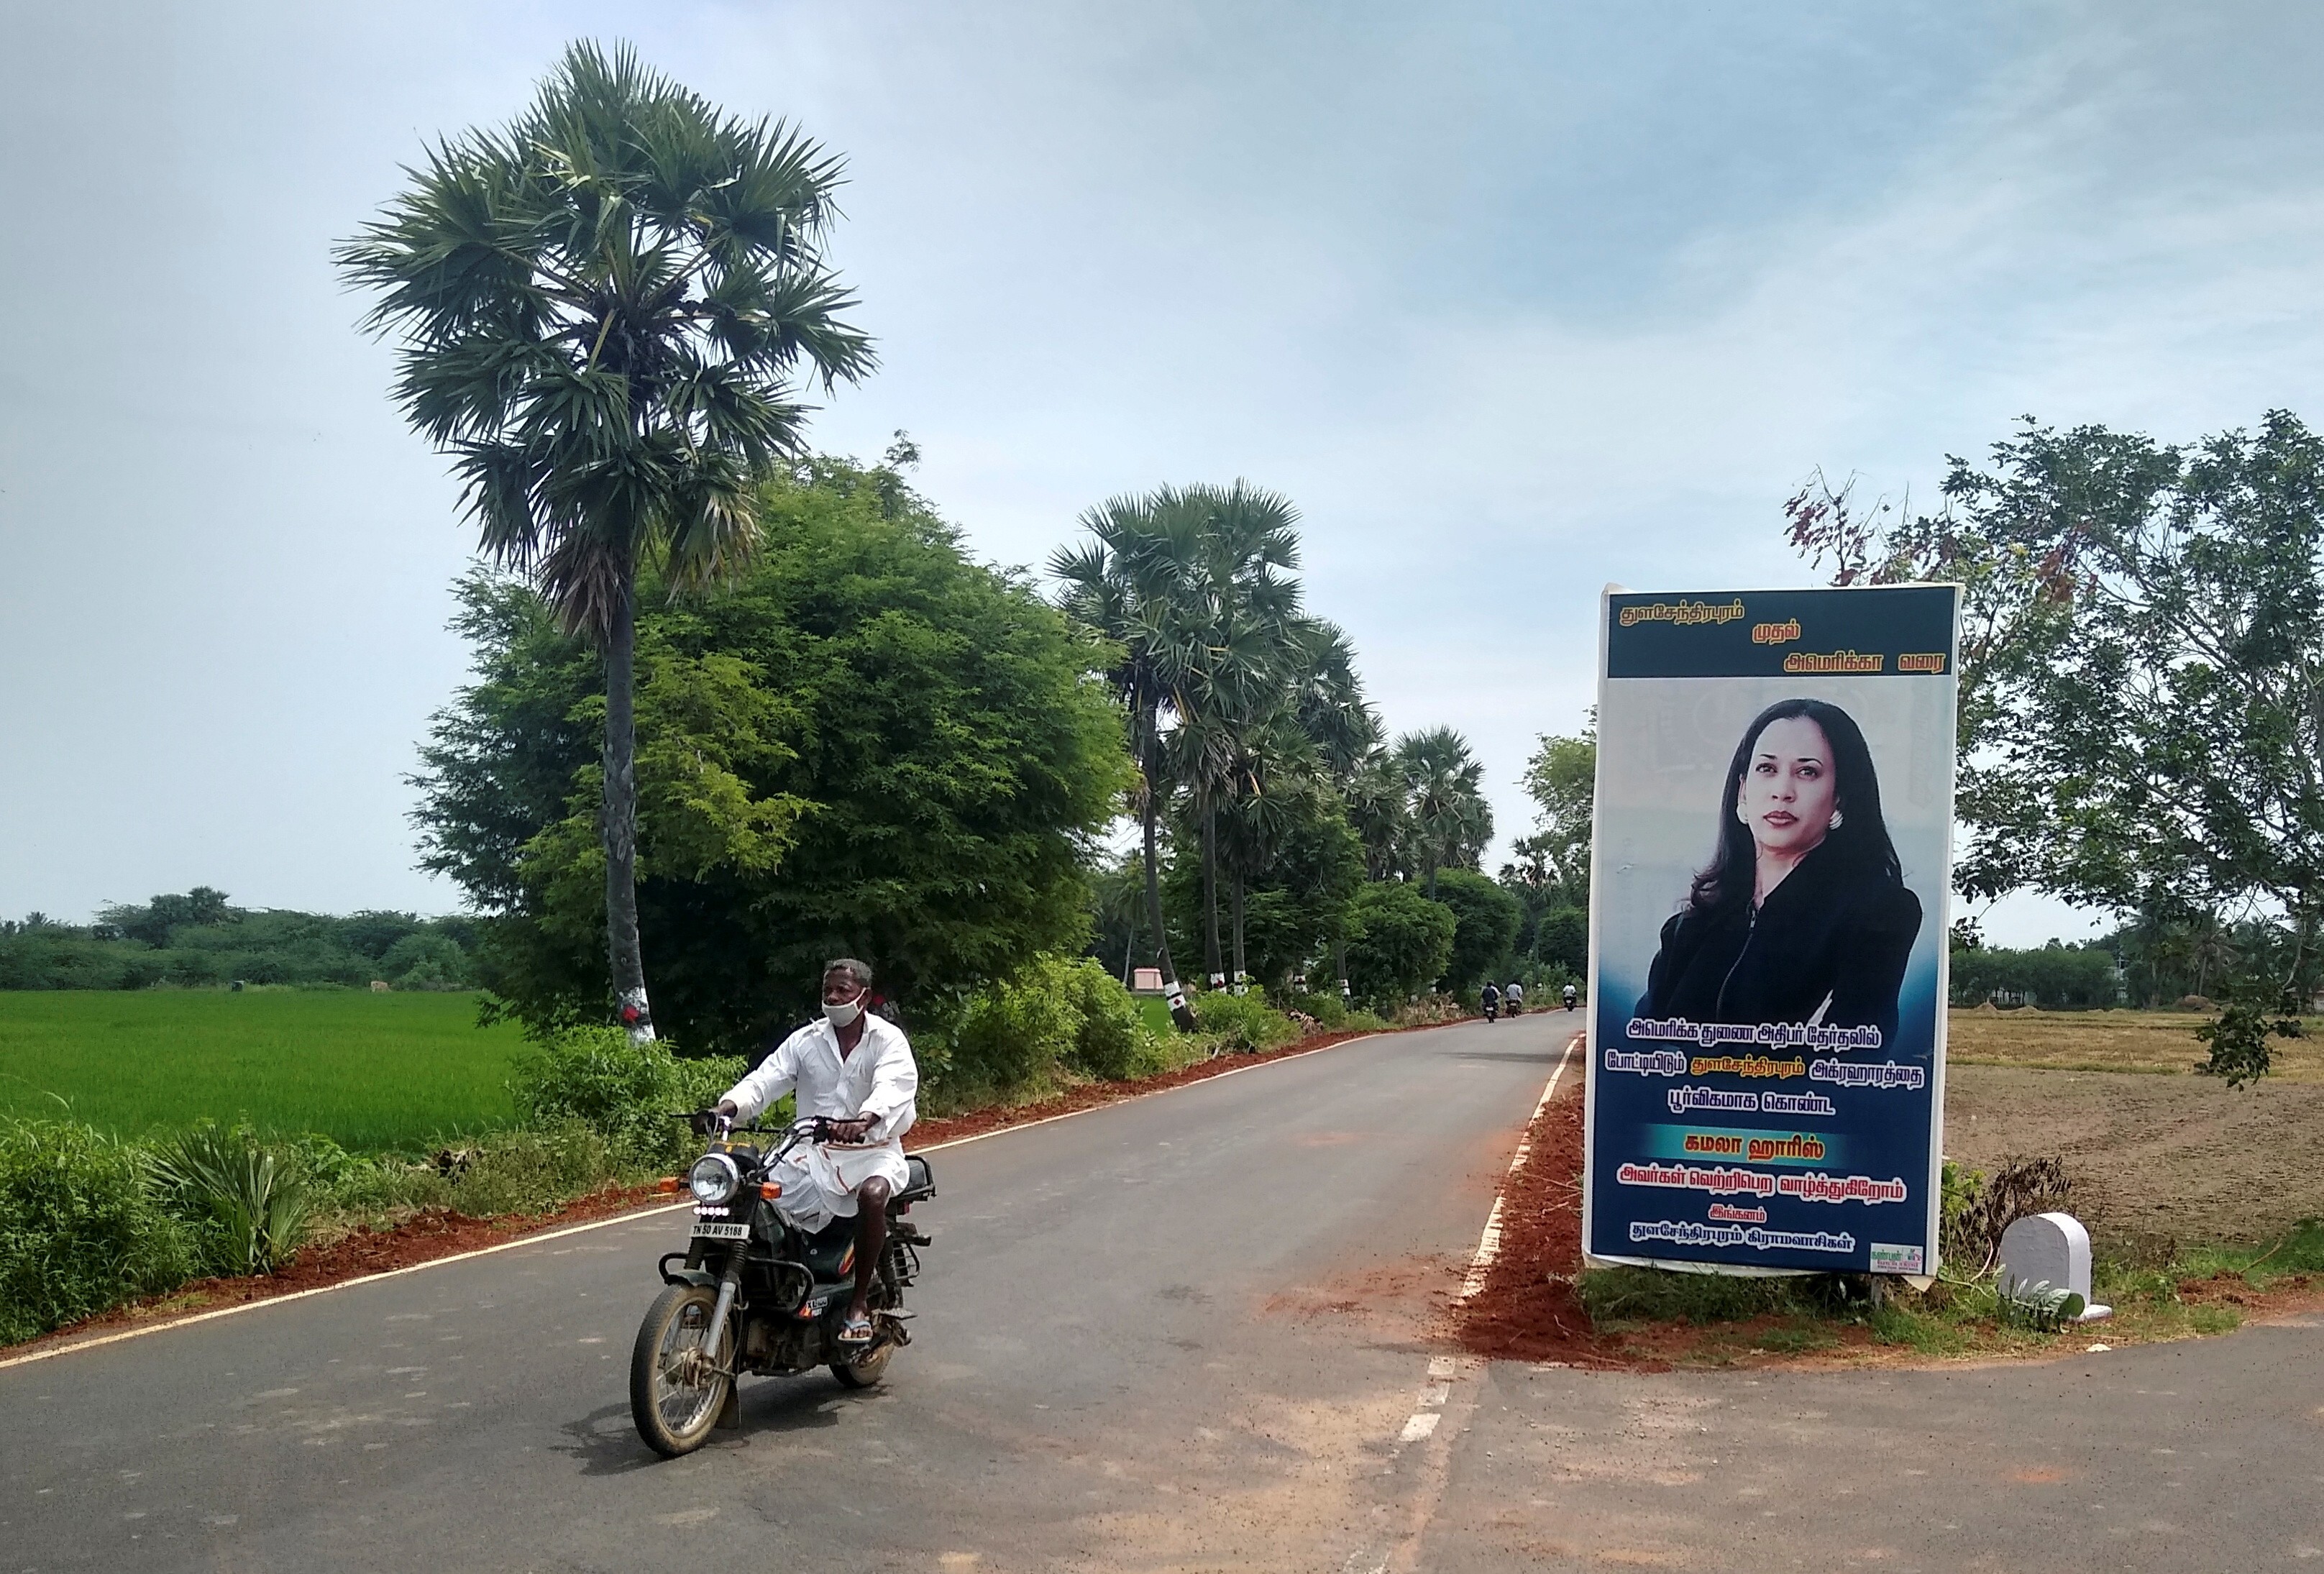 A banner featuring US Democratic vice-presidential nominee Kamala Harris at the entrance to the village of Thulasendrapuram, where Harris' maternal grandfather was born and grew up, in the southern Indian state of Tamil Nadu. Photo: Reuters